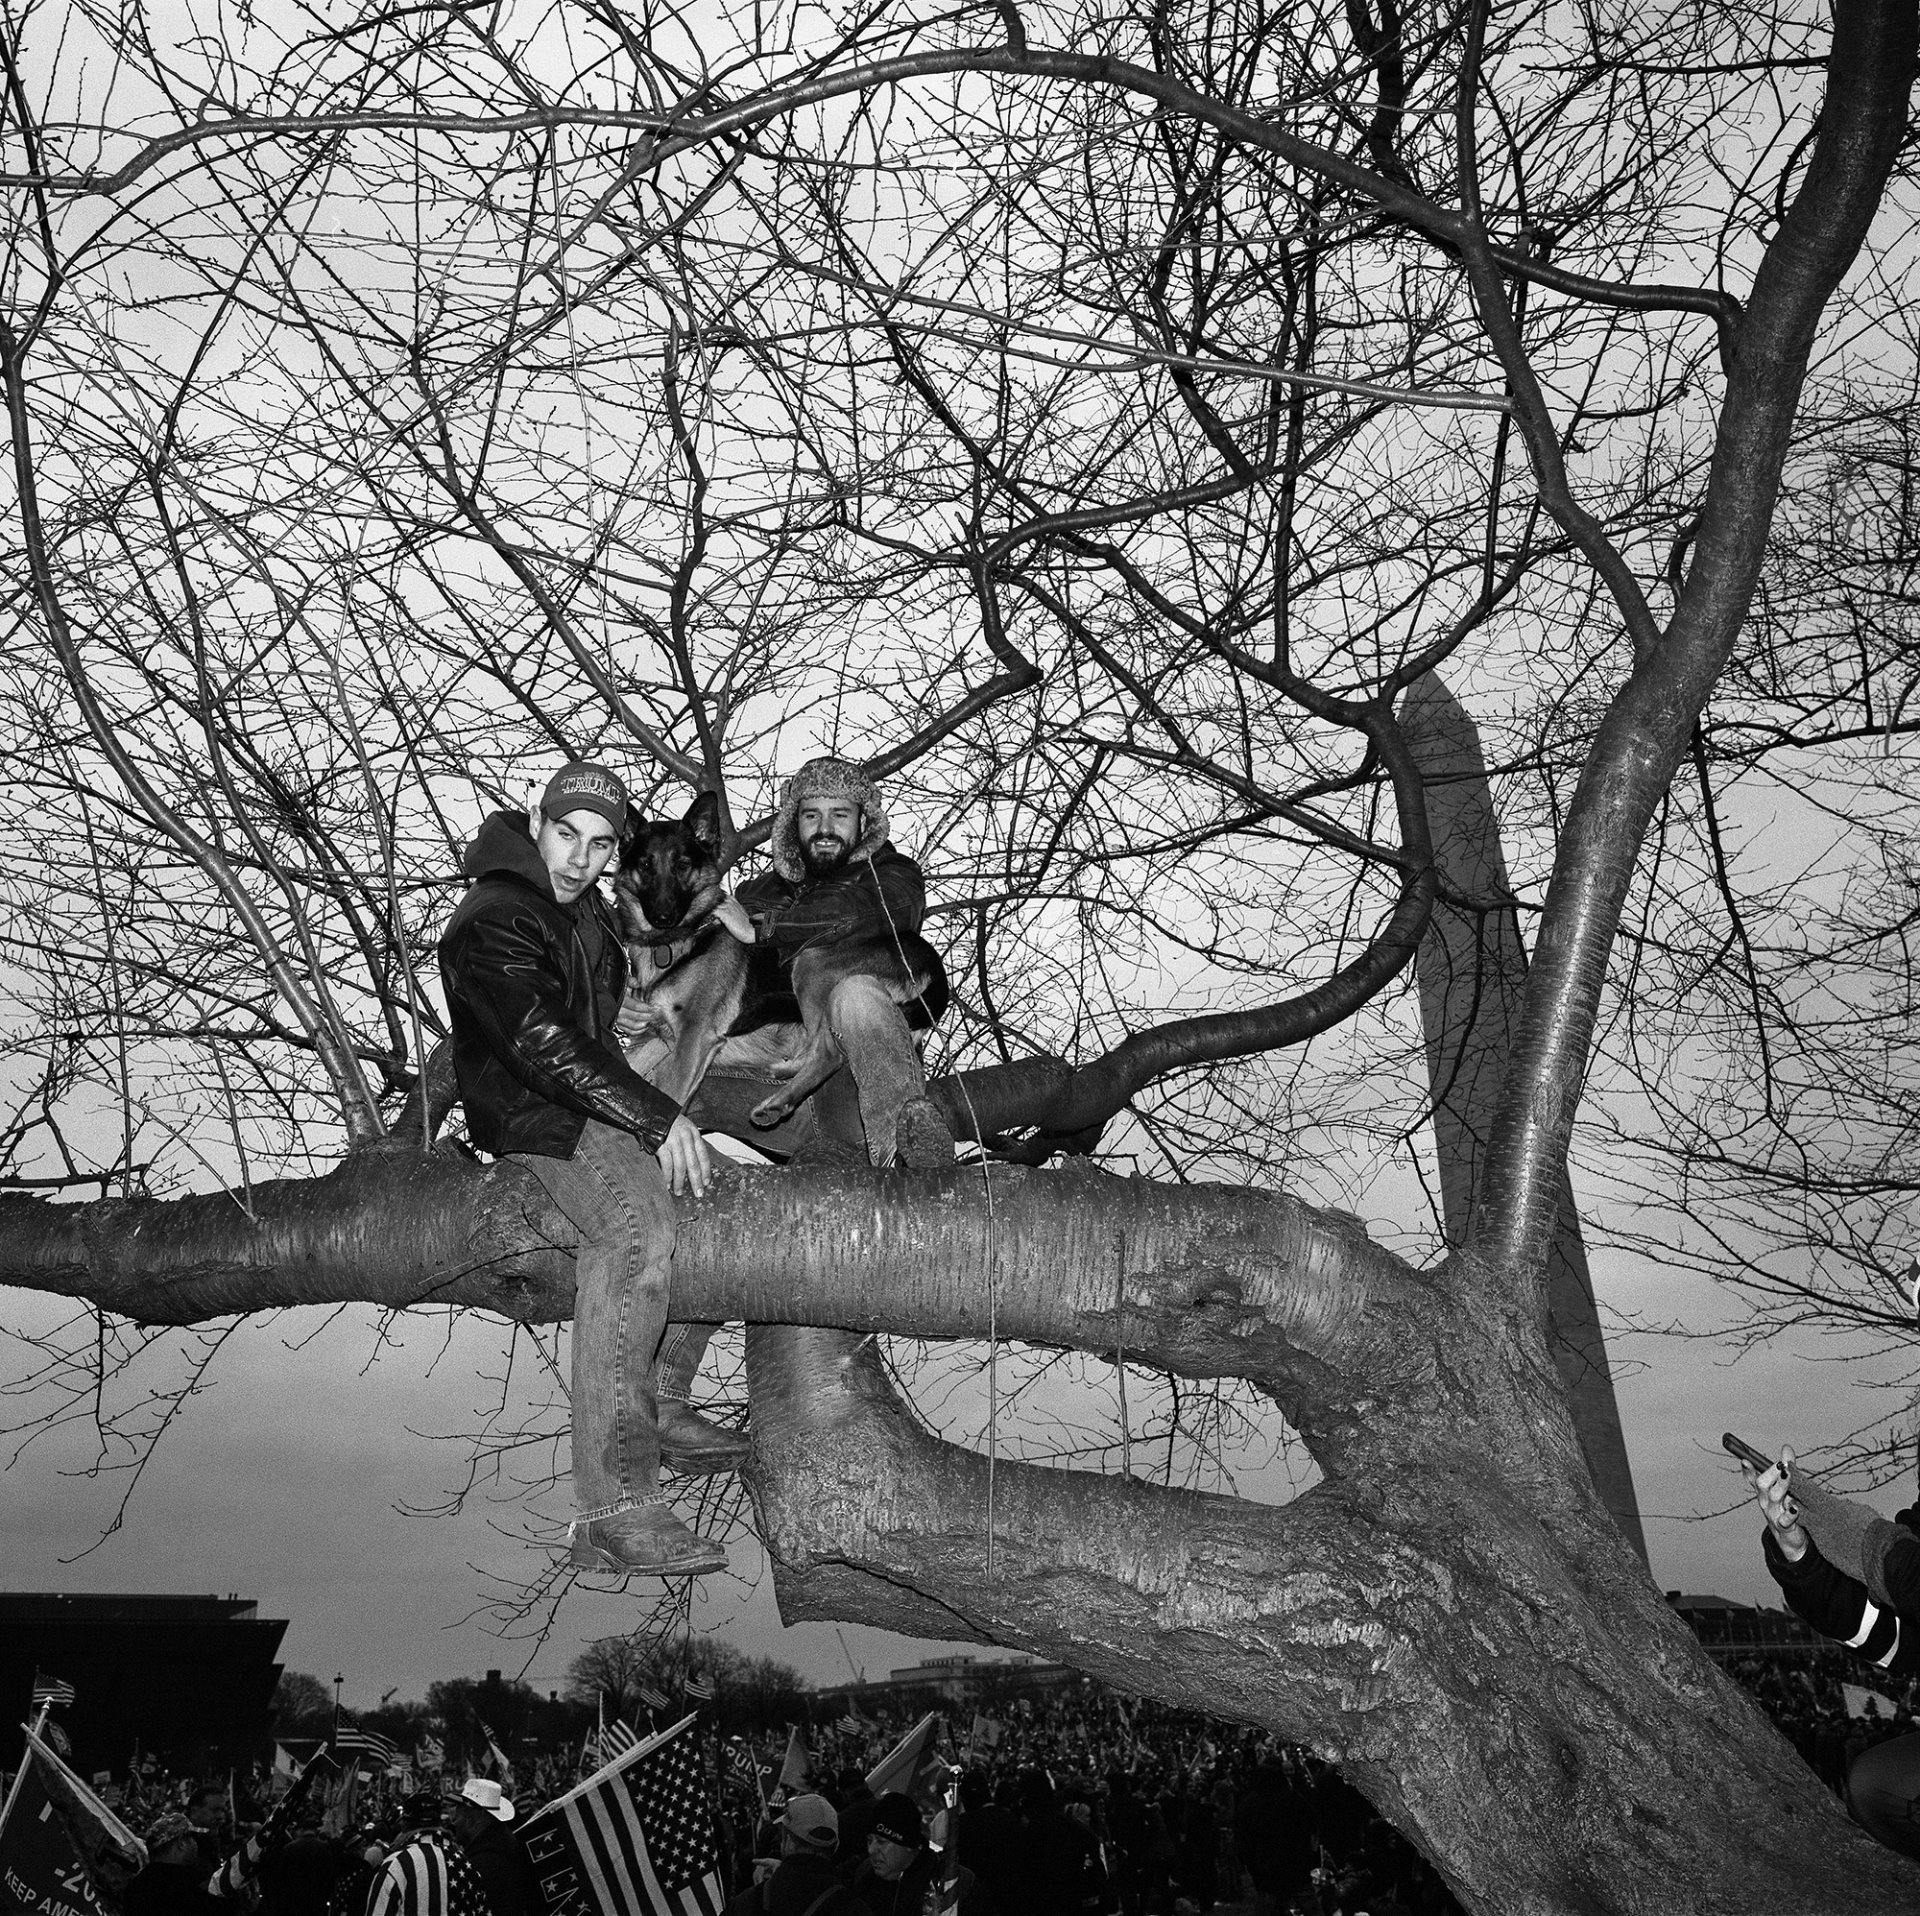 Two men watch the Save America rally from a tree on the Ellipse, near the White House, in Washington DC, USA, on 6 January 2021. At the rally, President Trump encouraged supporters to march to the Capitol, in a speech that later led to accusations that he was inciting them to violence. Trump&rsquo;s lawyers said he was merely making statements about the need for election security in general.